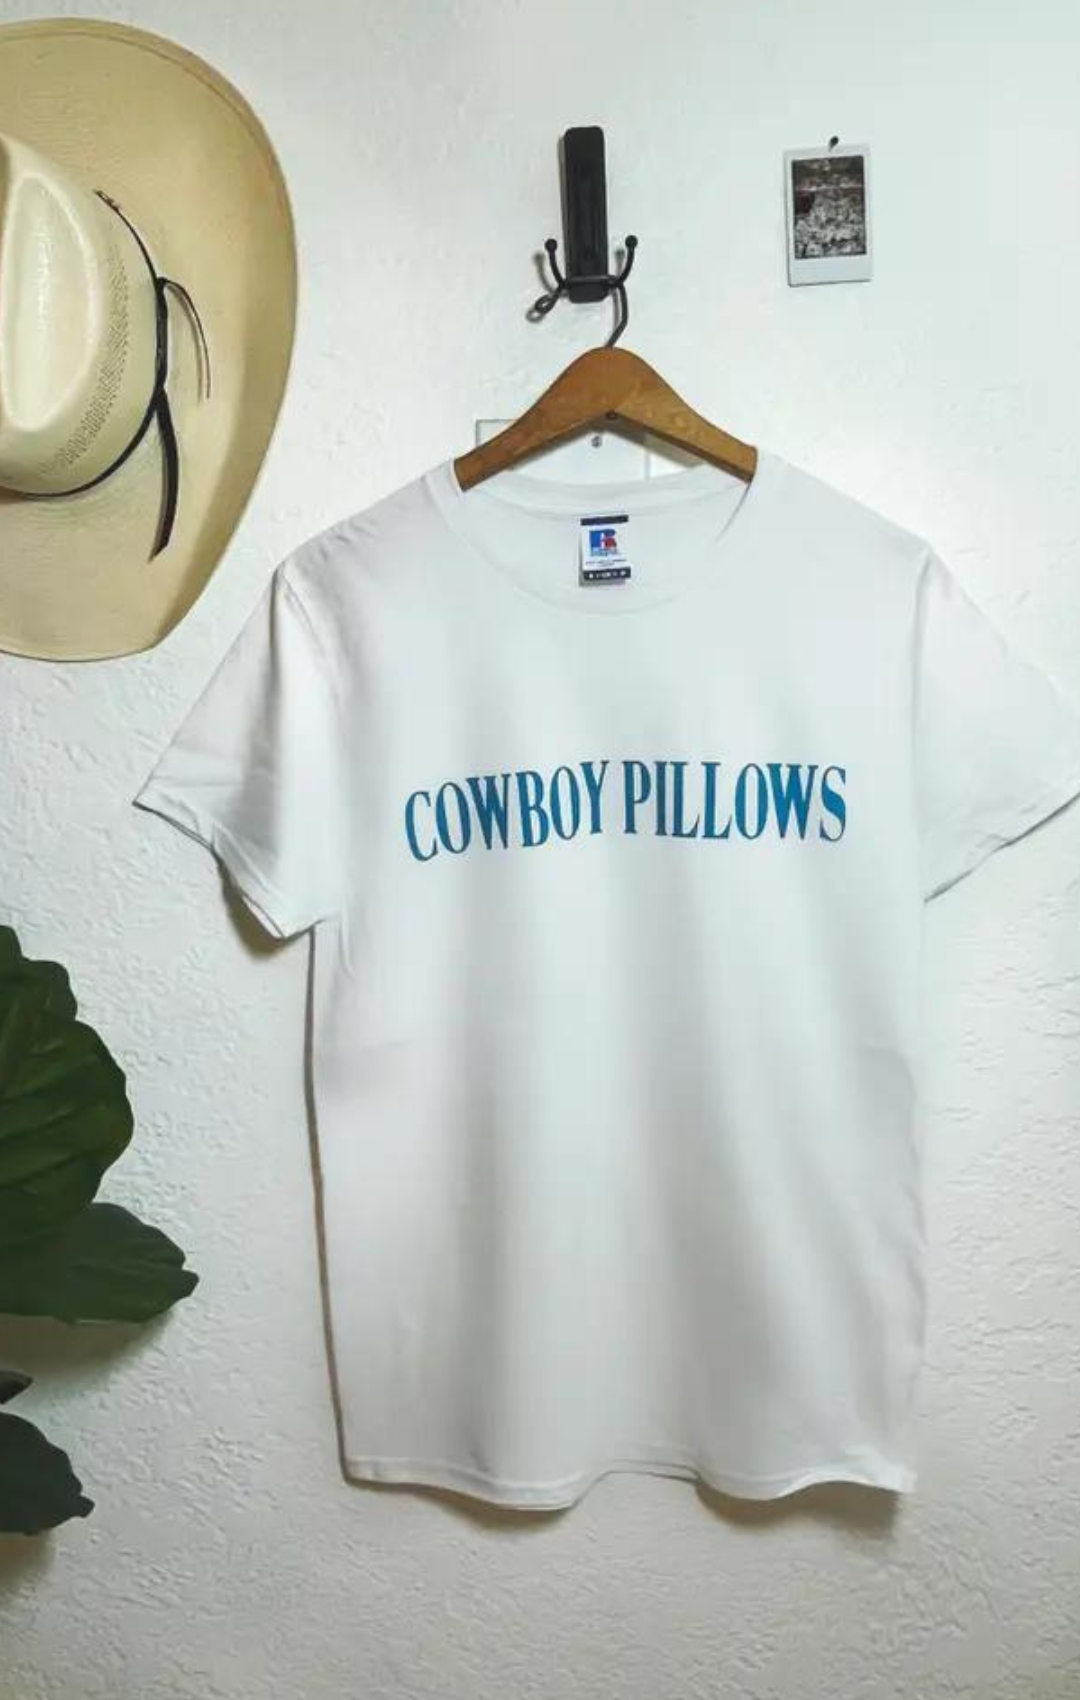 Turquoise Cowboy Pillows Tee